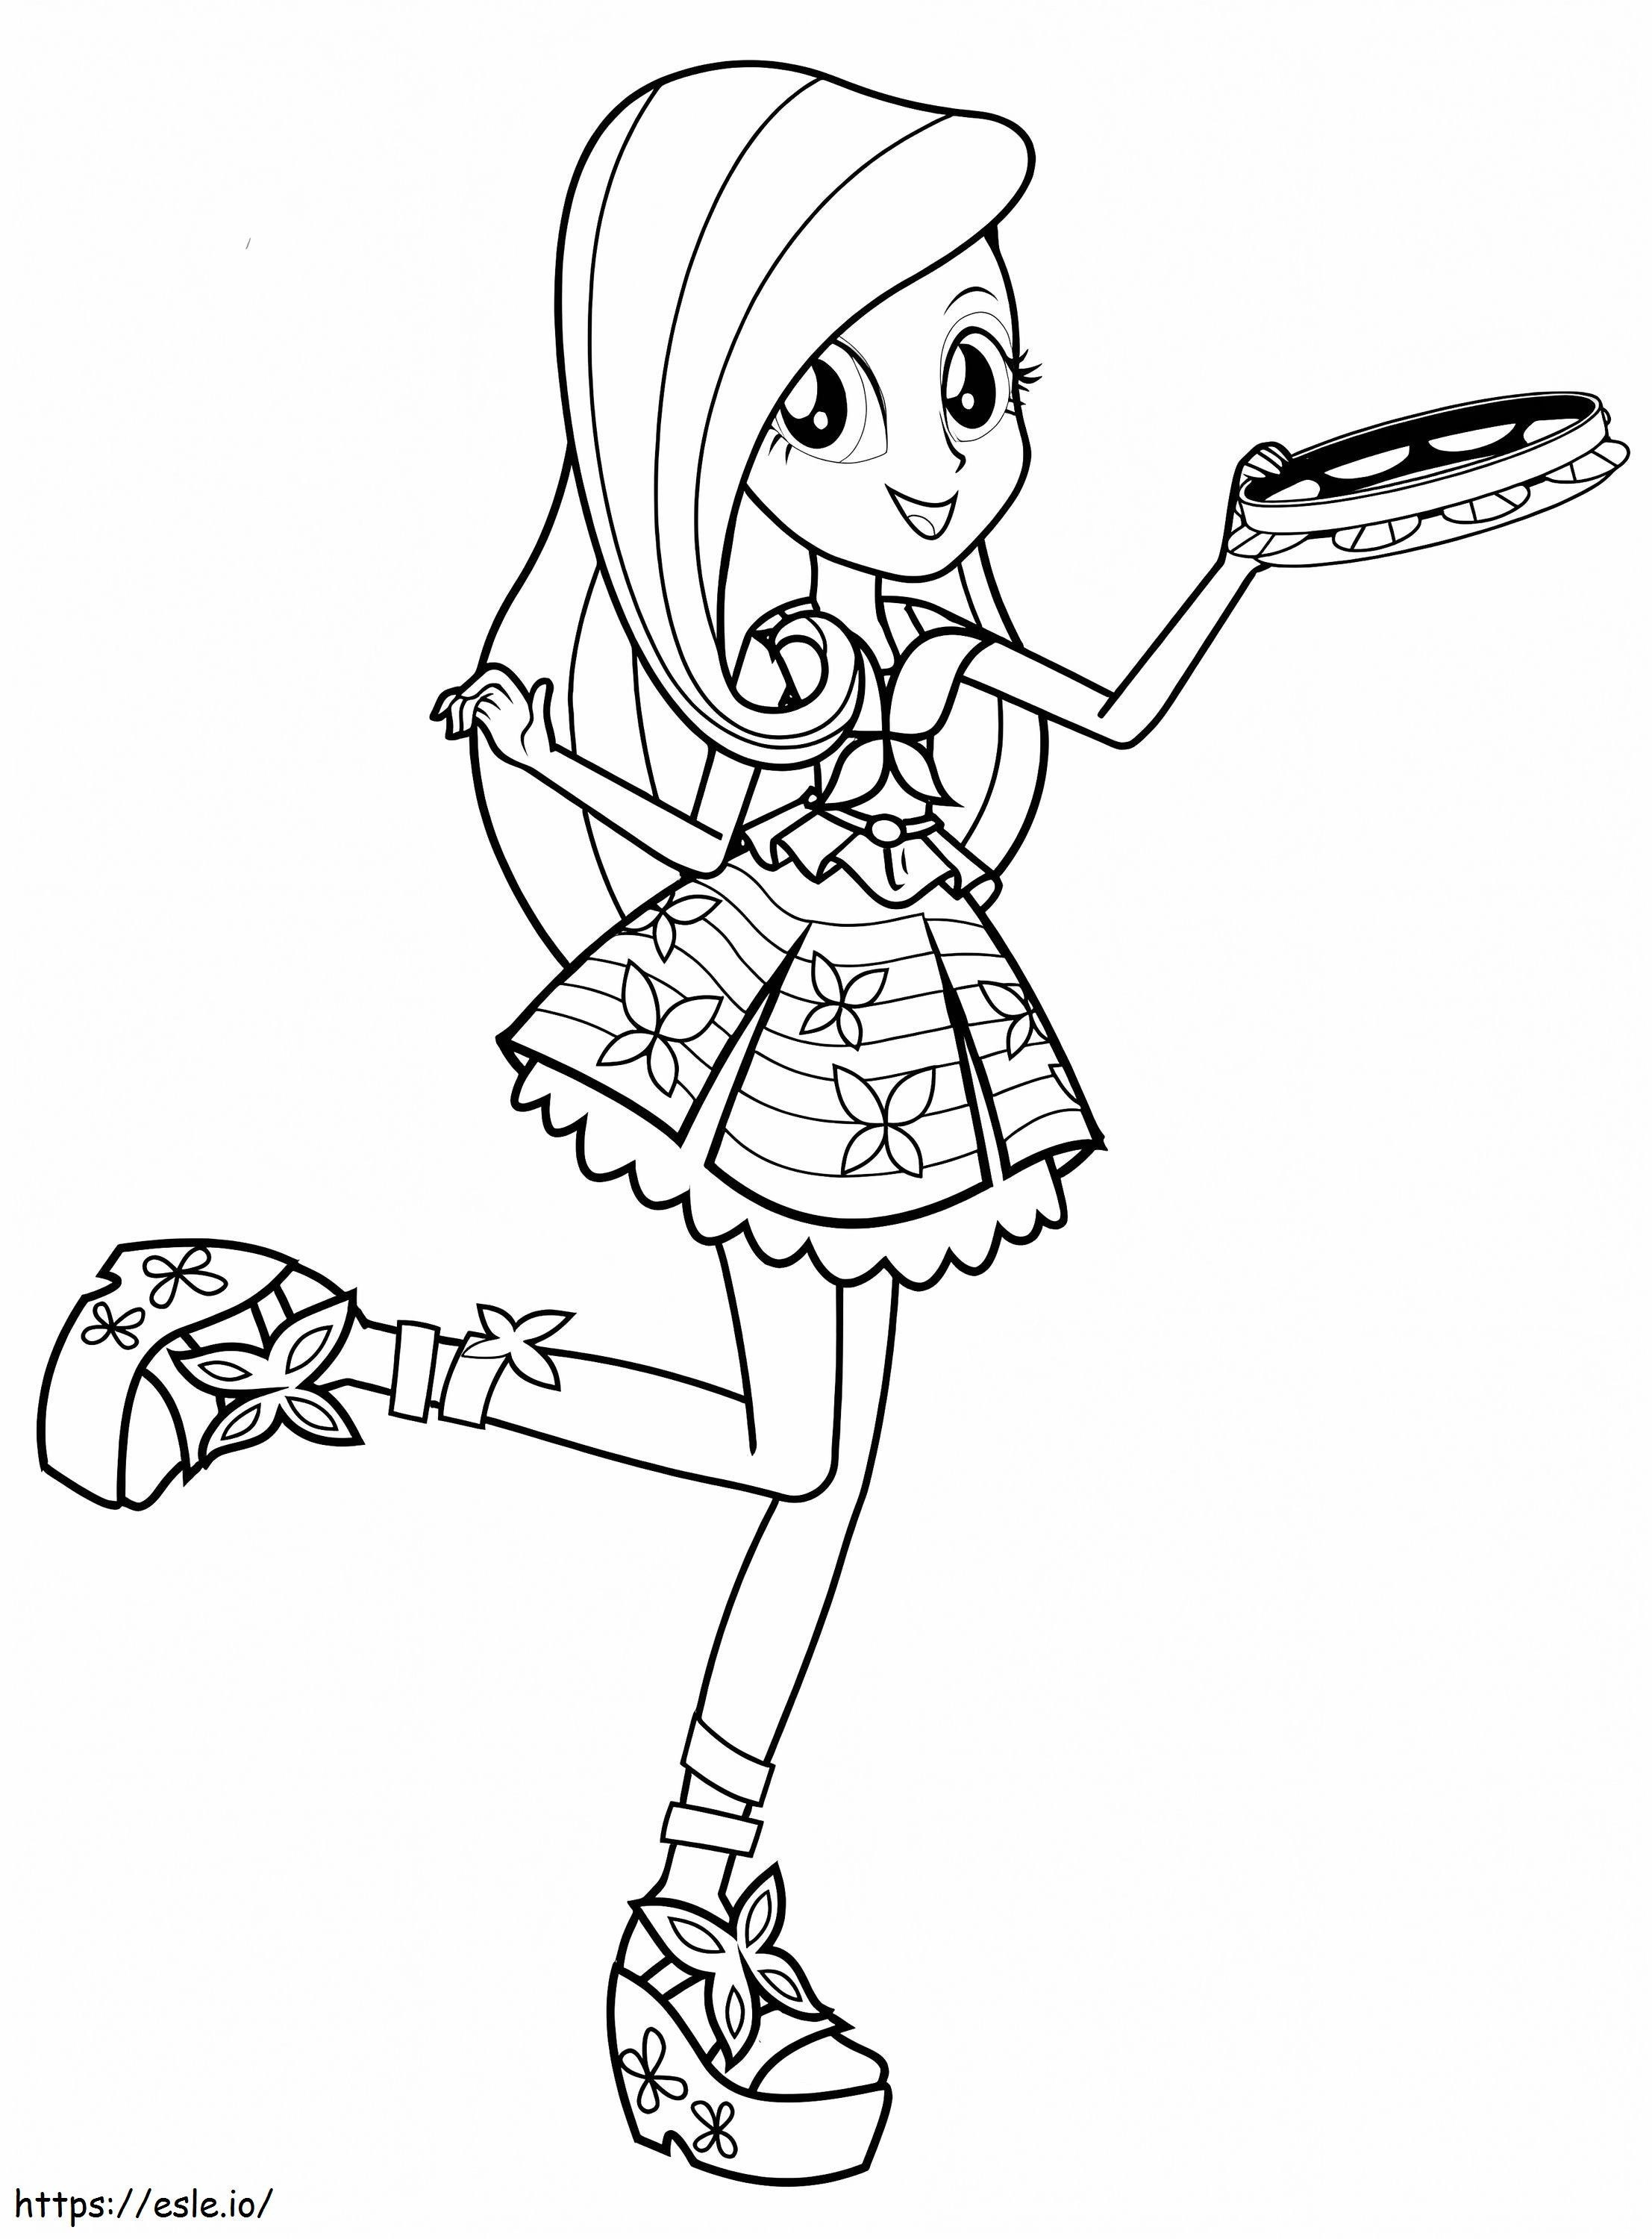 Equestria Girls 13 coloring page